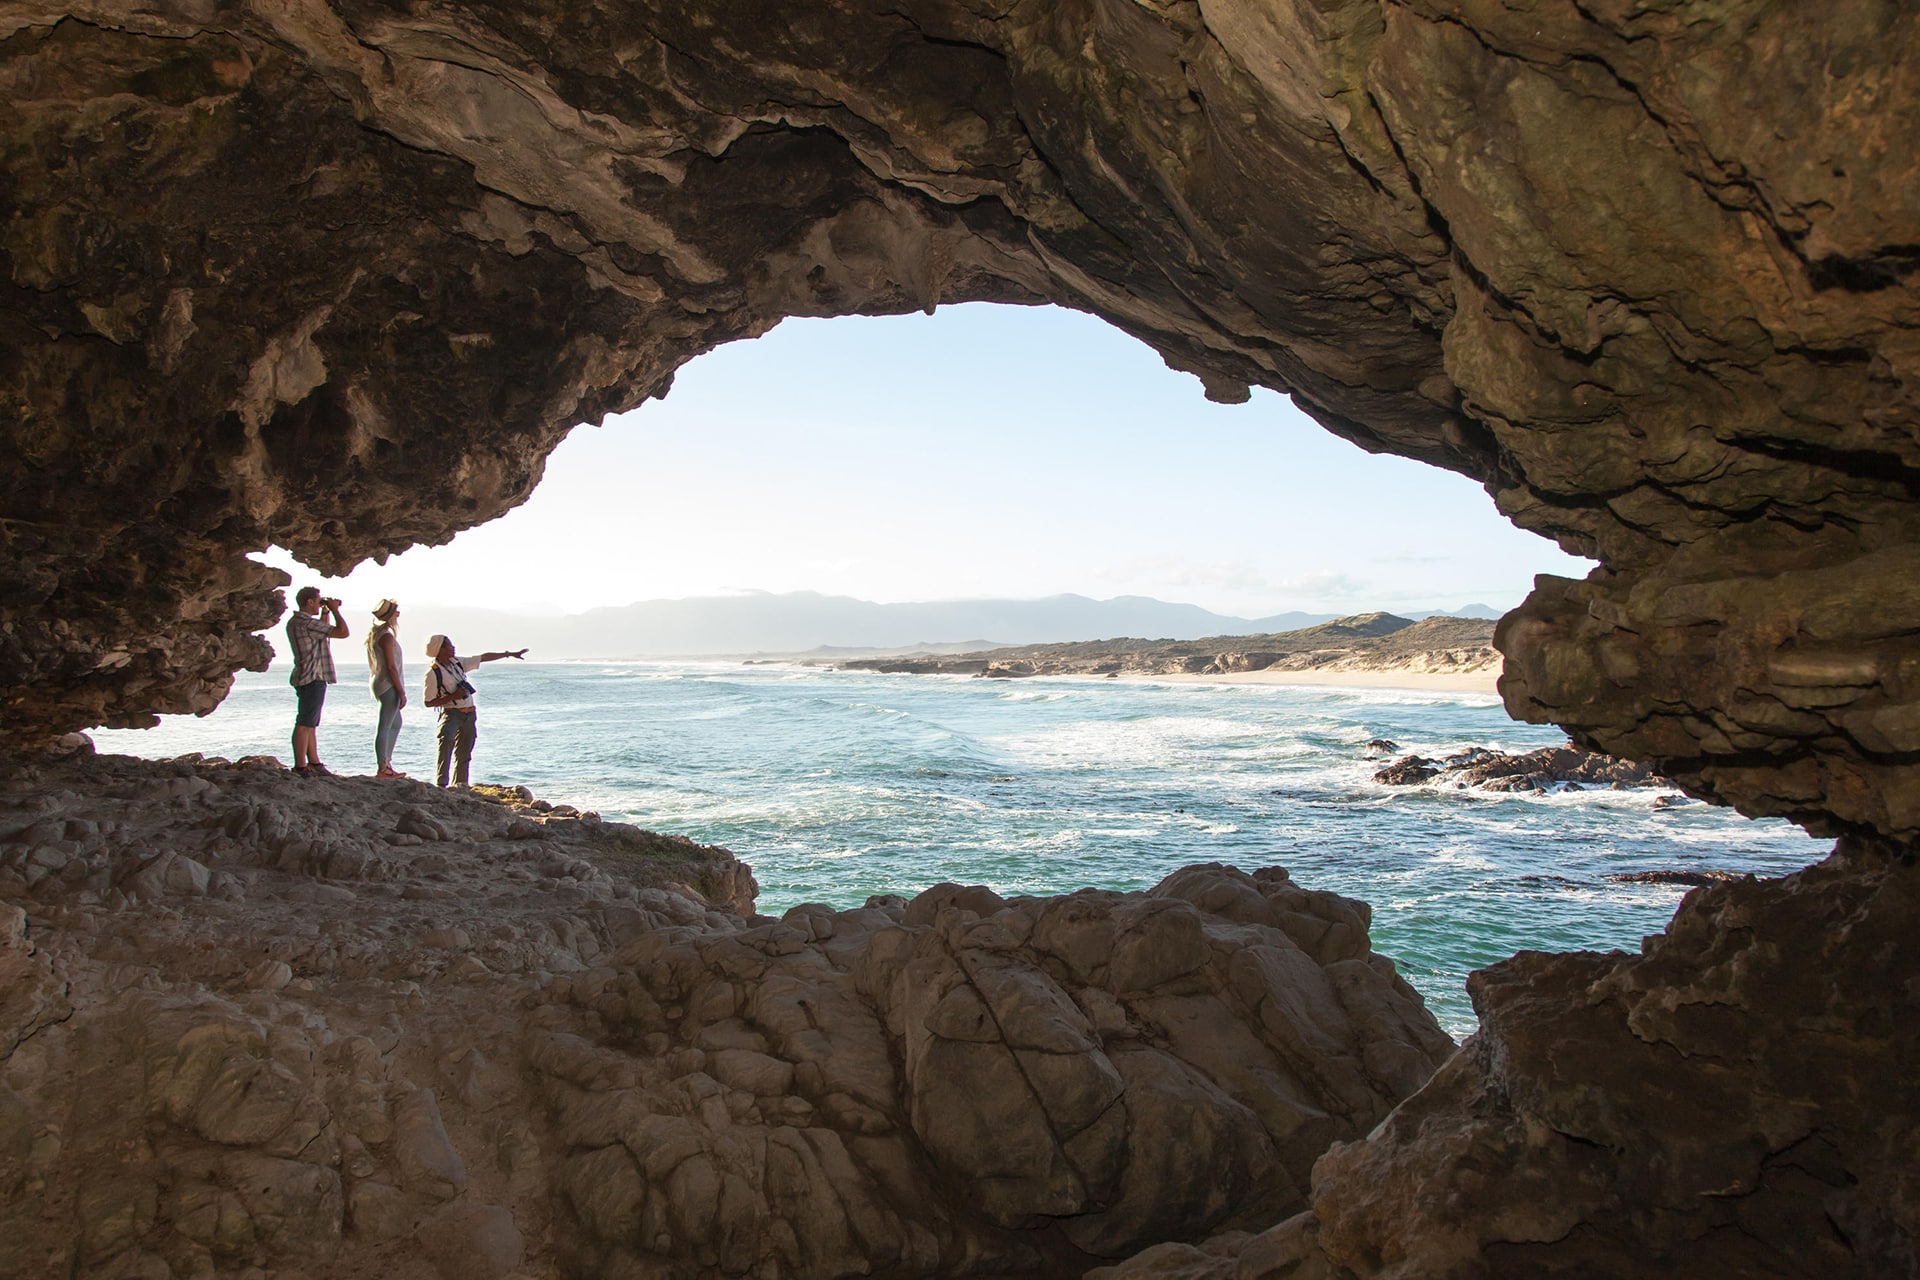 Guided activity to coastal caves while staying at Grootbos Forest Lodge